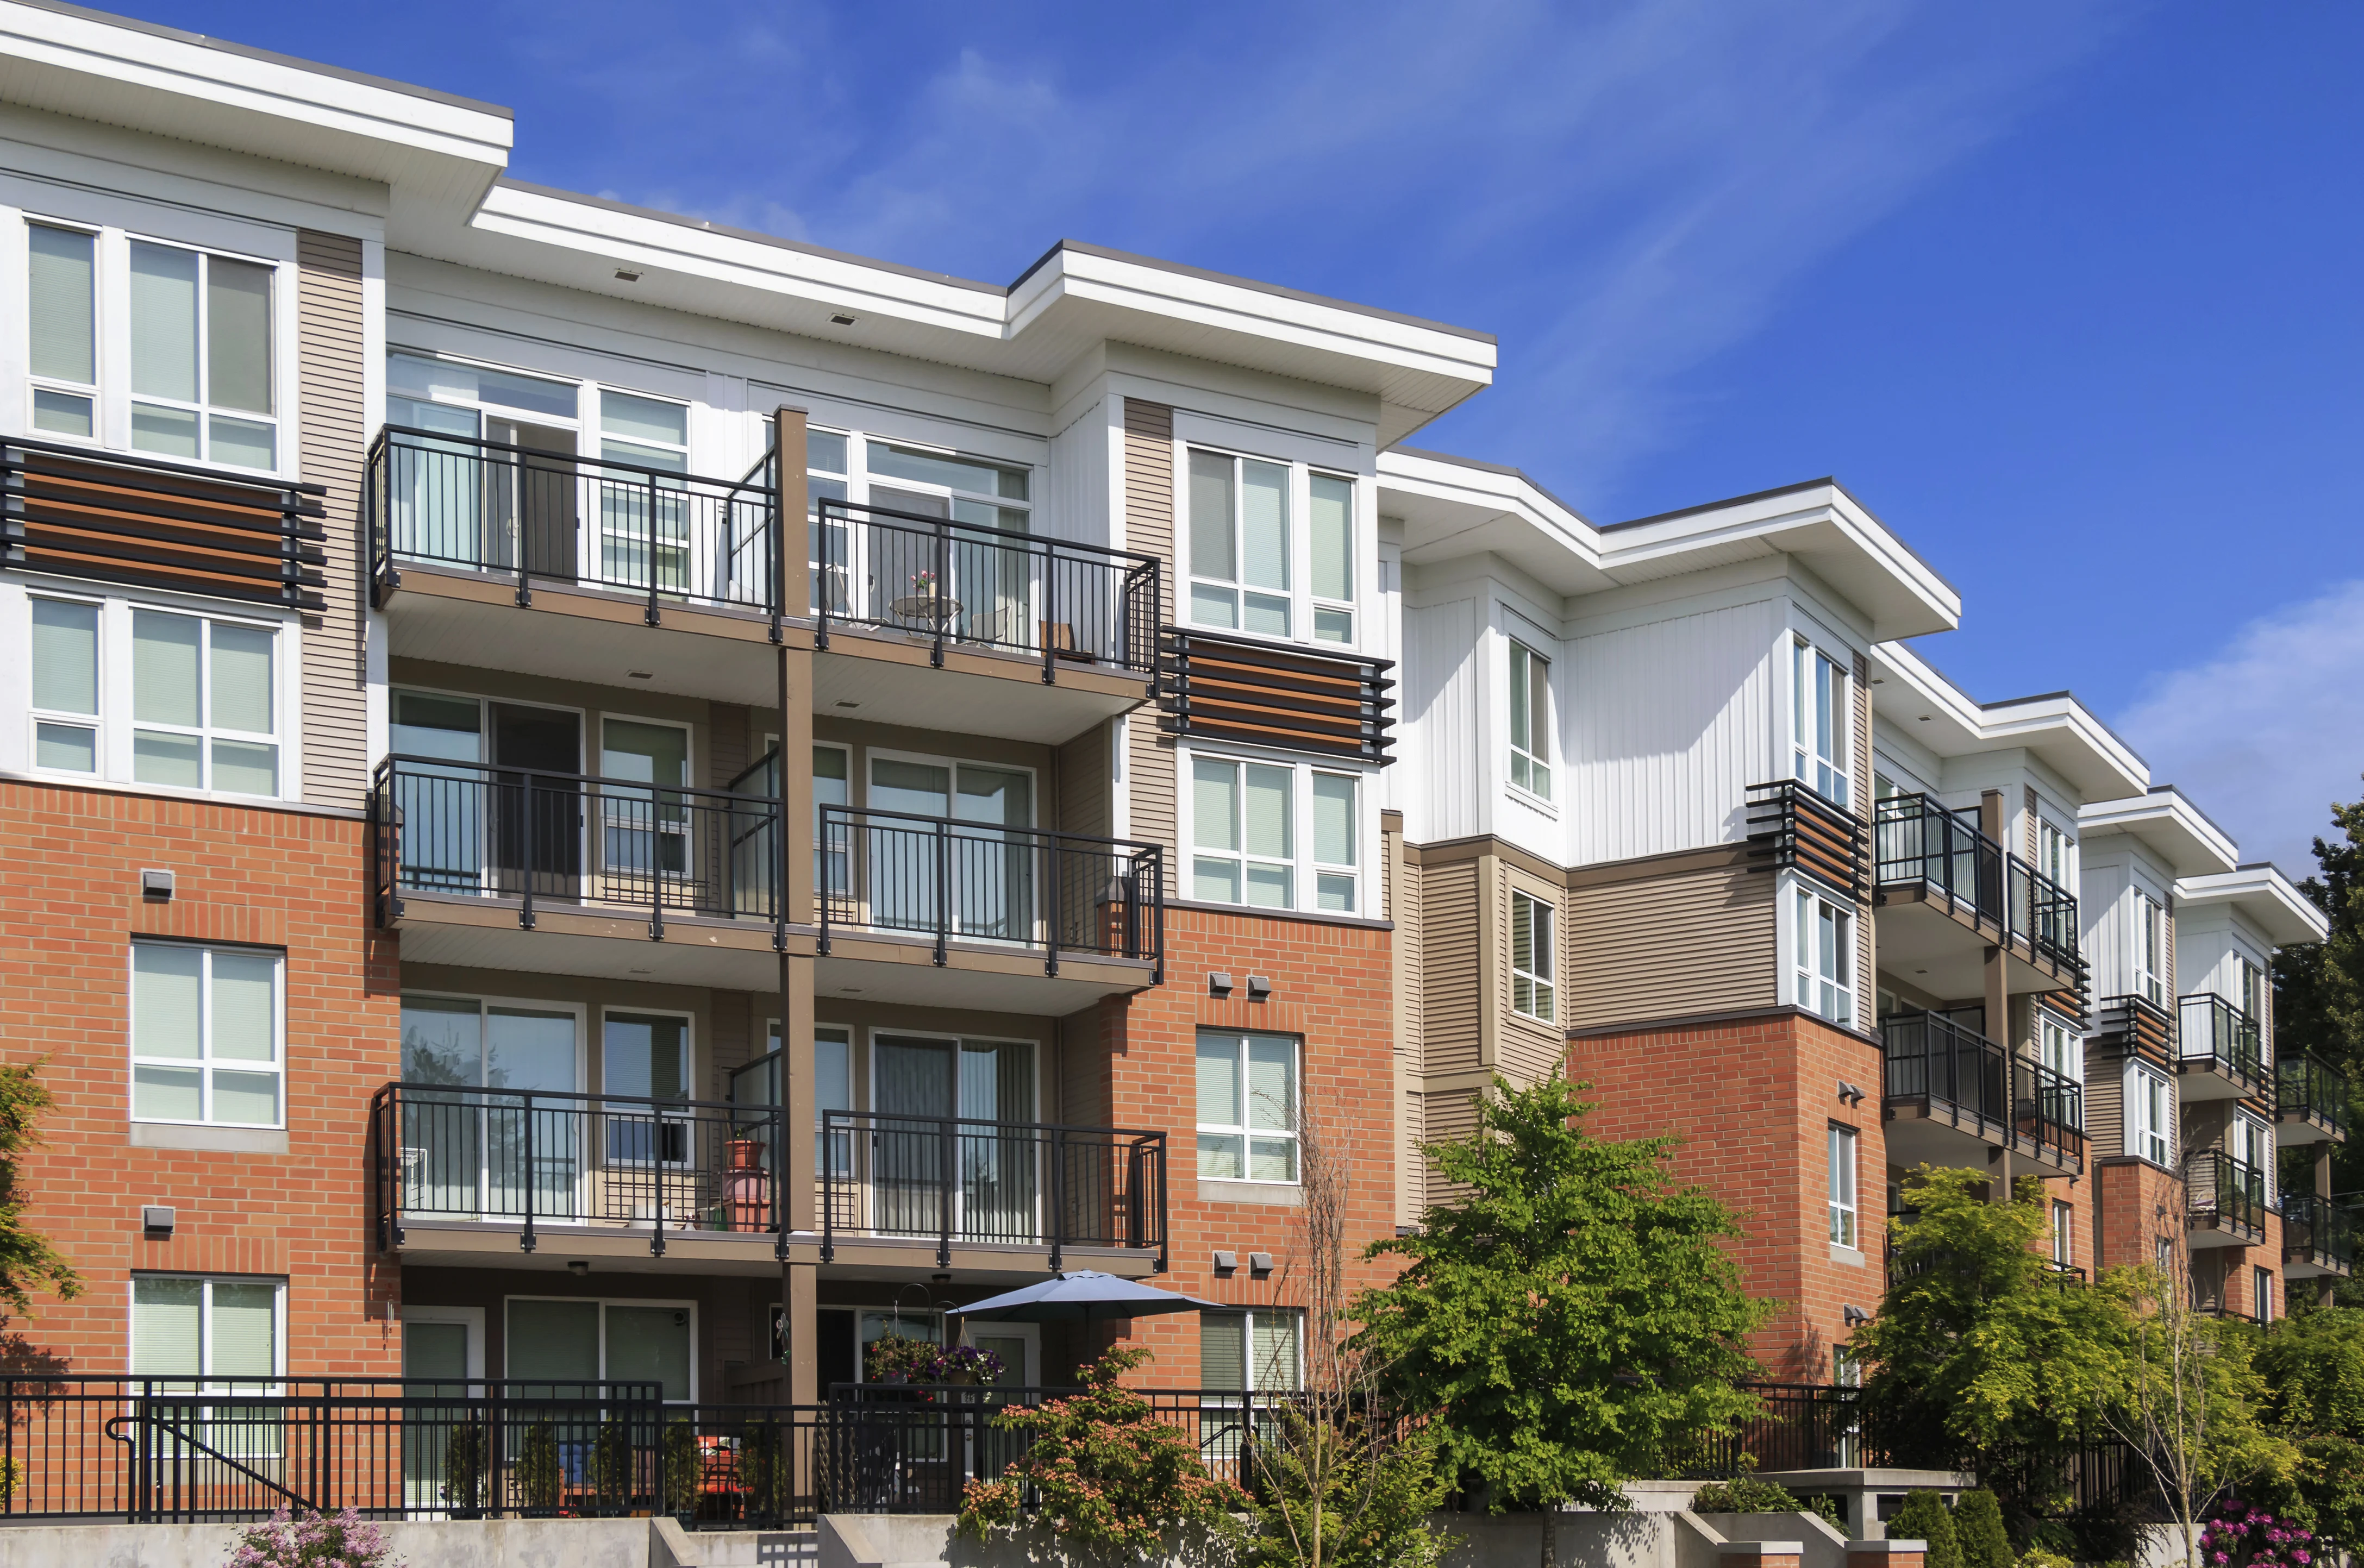 The 10 Best Markets for Multifamily Investment | National Real Estate Investor